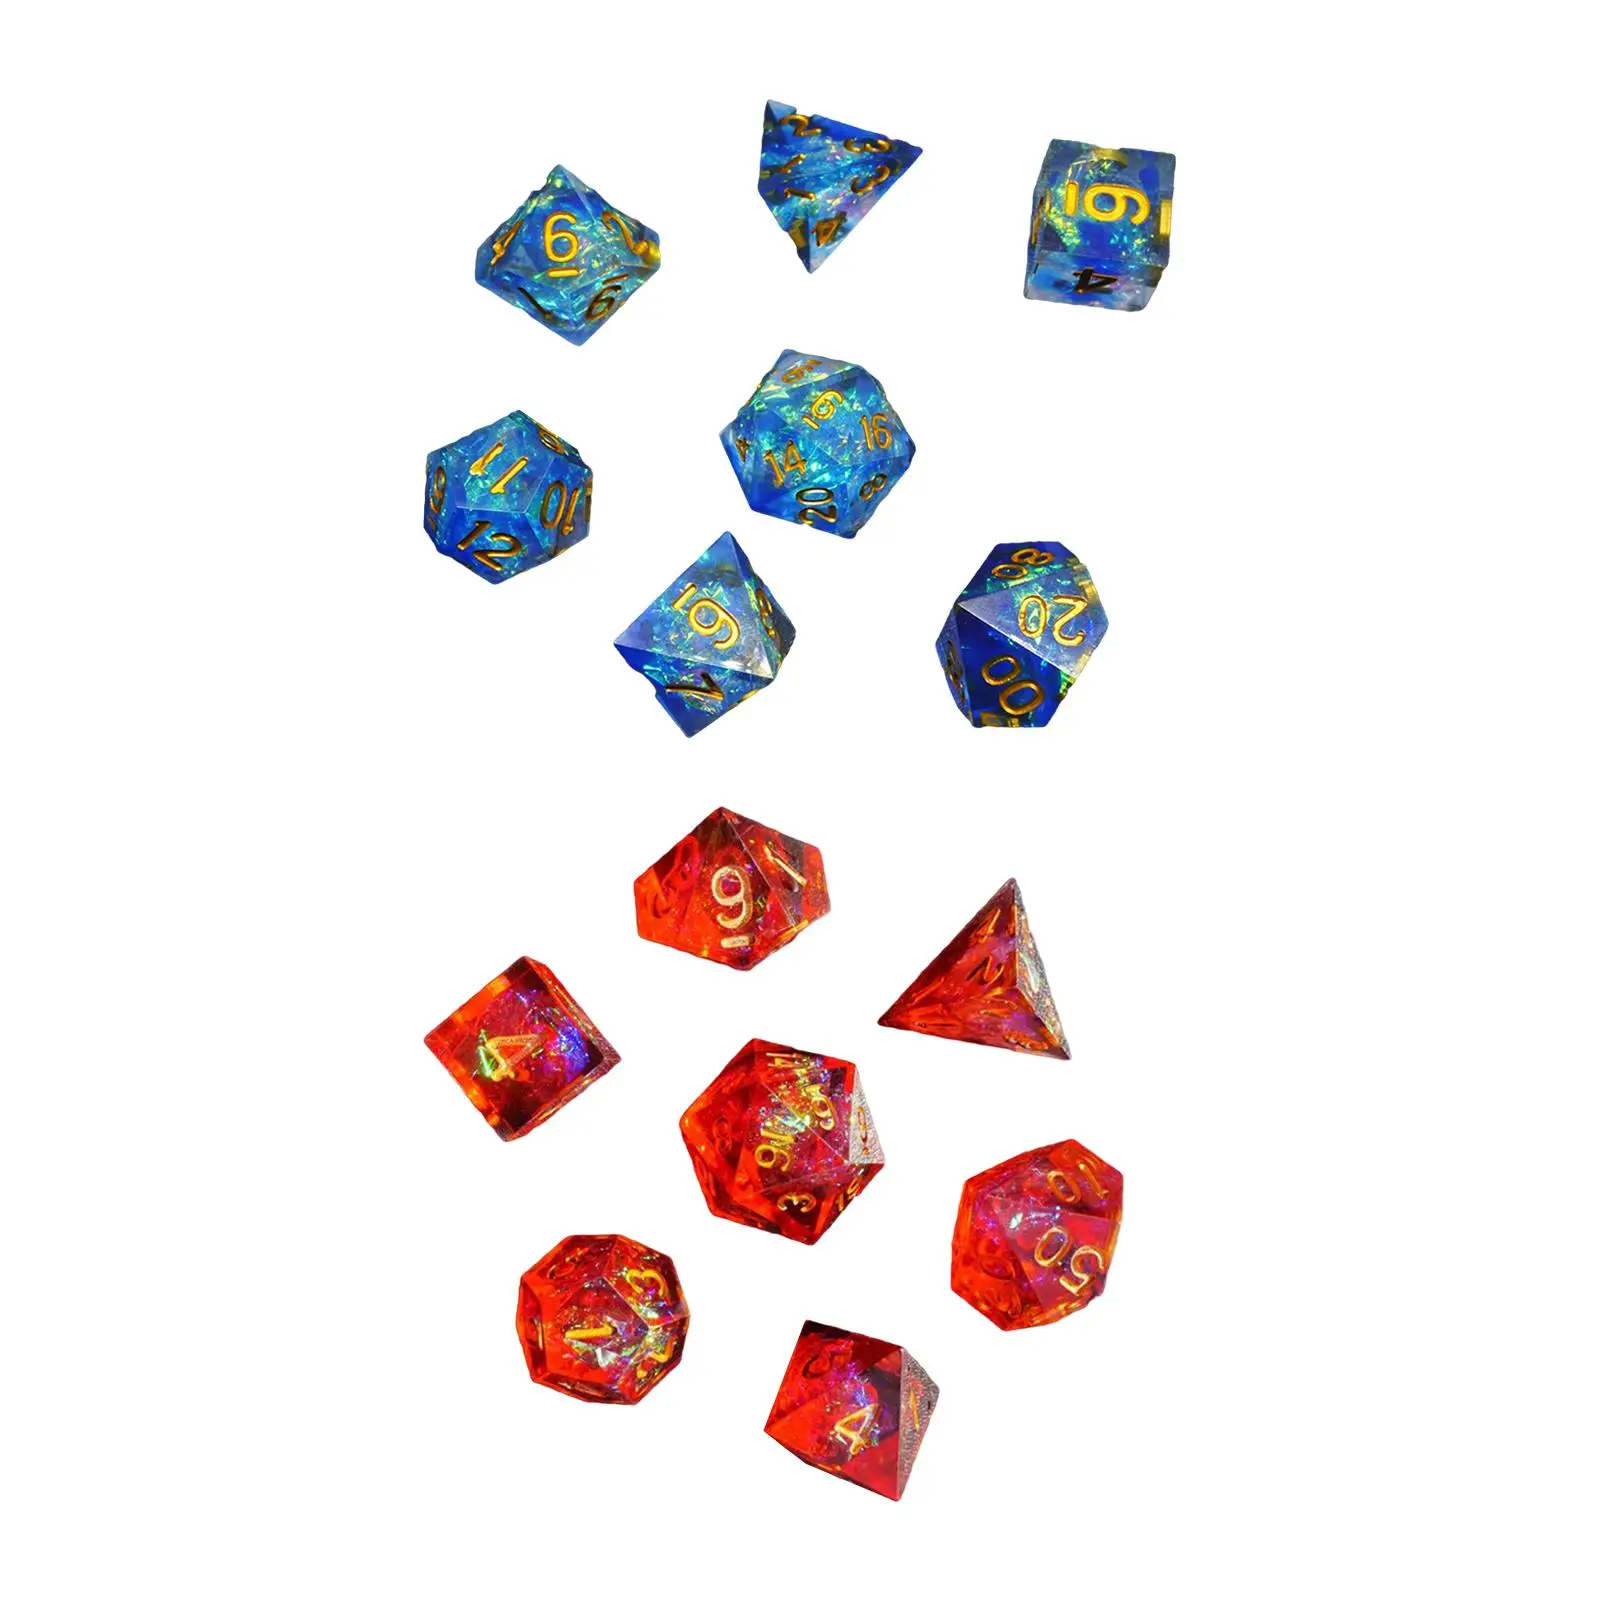 7Pcs Multifaceted Polyhedral Dice Entertainment Toys Table Game Toy for Home Party Game Tabletop Game